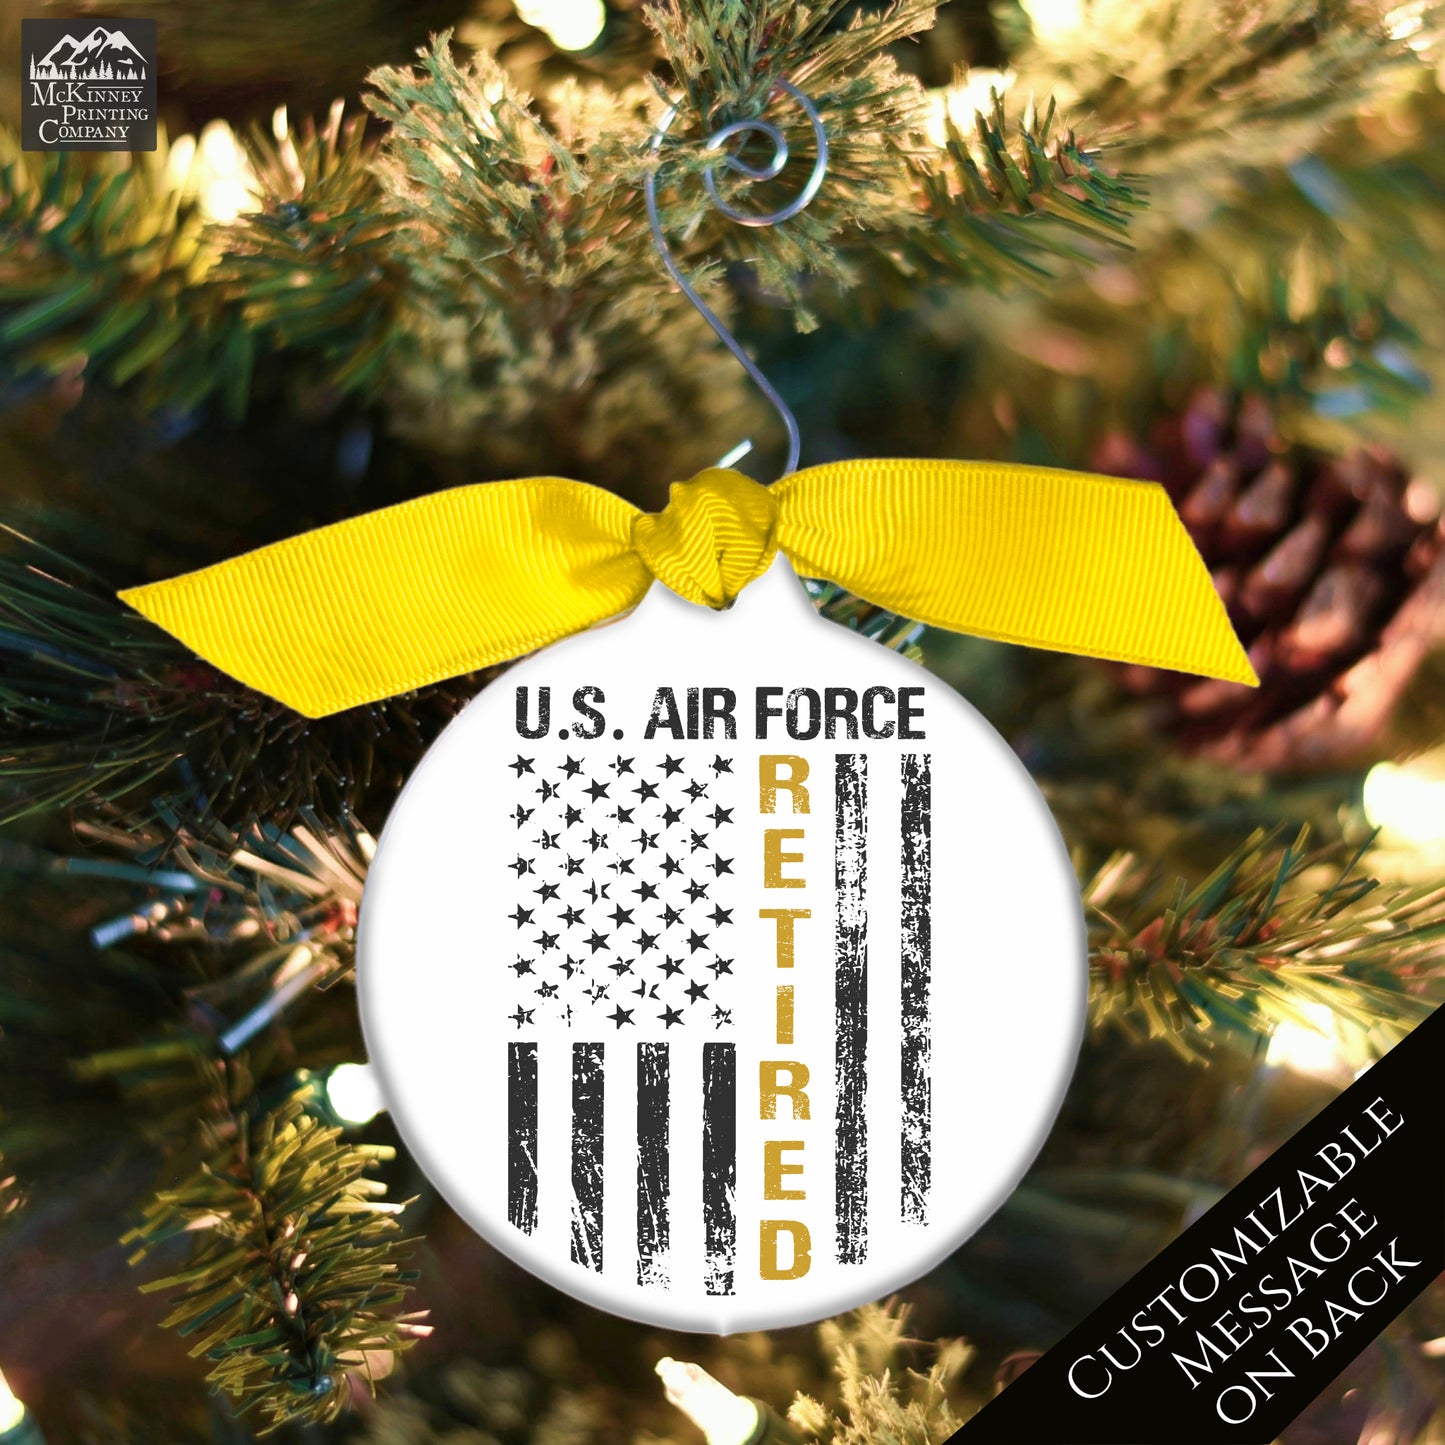 Air Force Ornament - Military, Christmas, Veteran, USAF, Retired, Gift